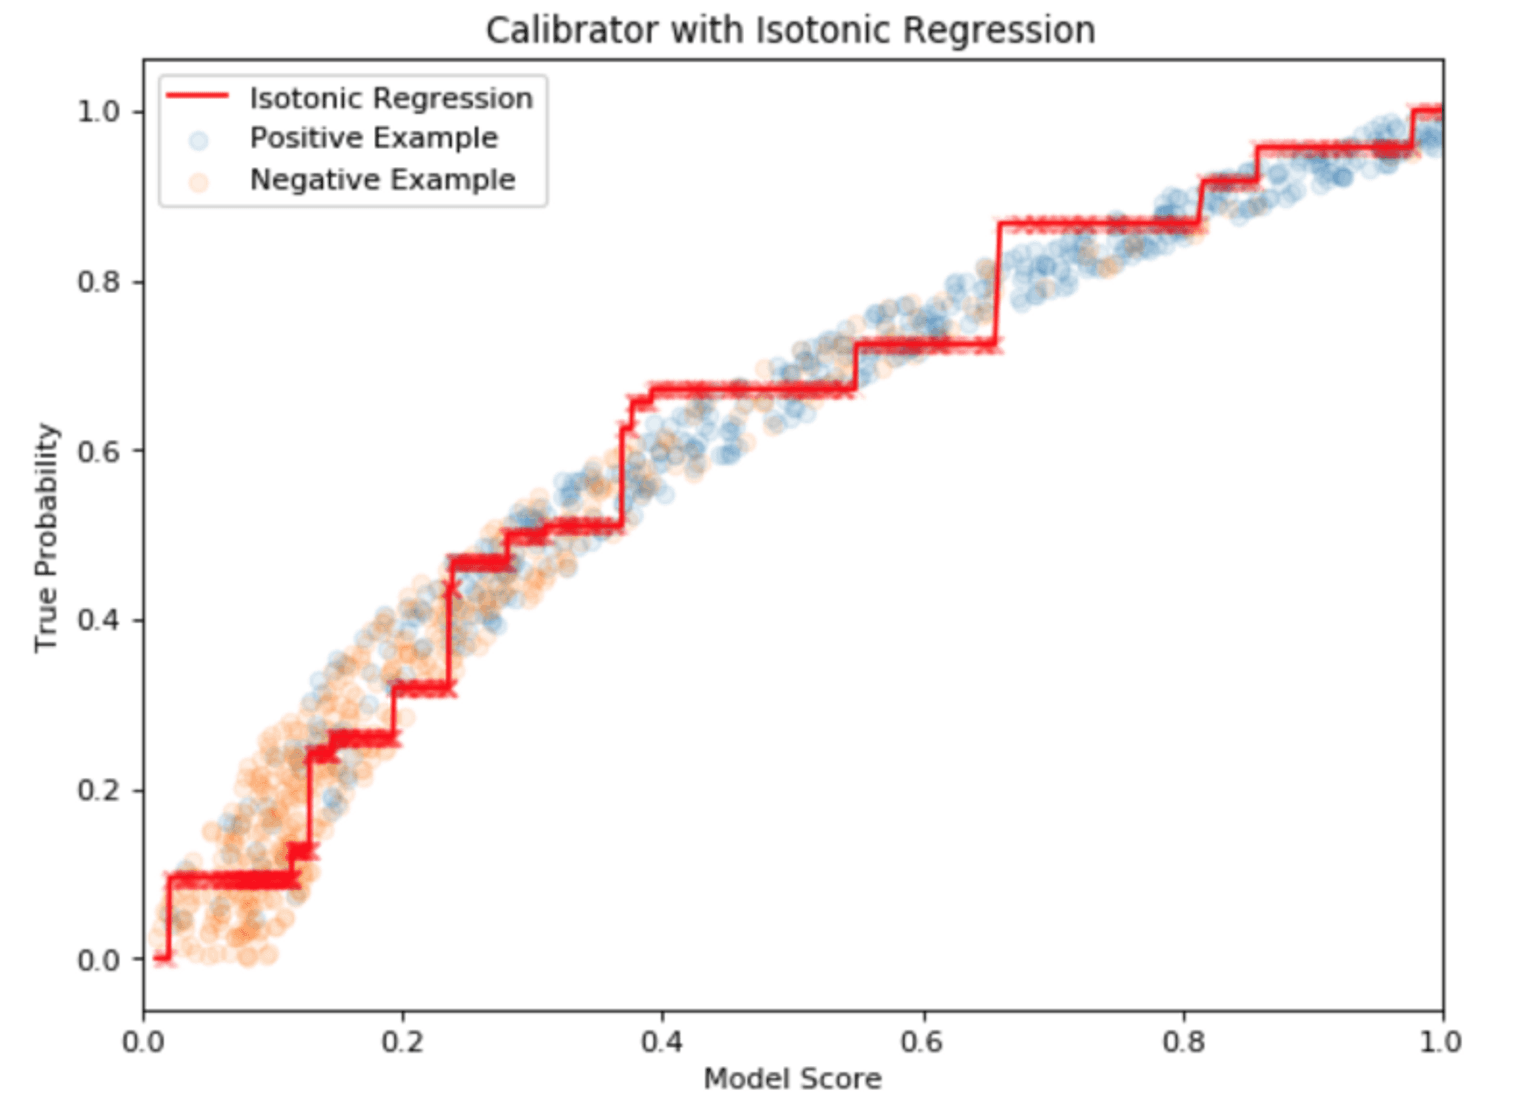 Attack probability model with isotonic regression